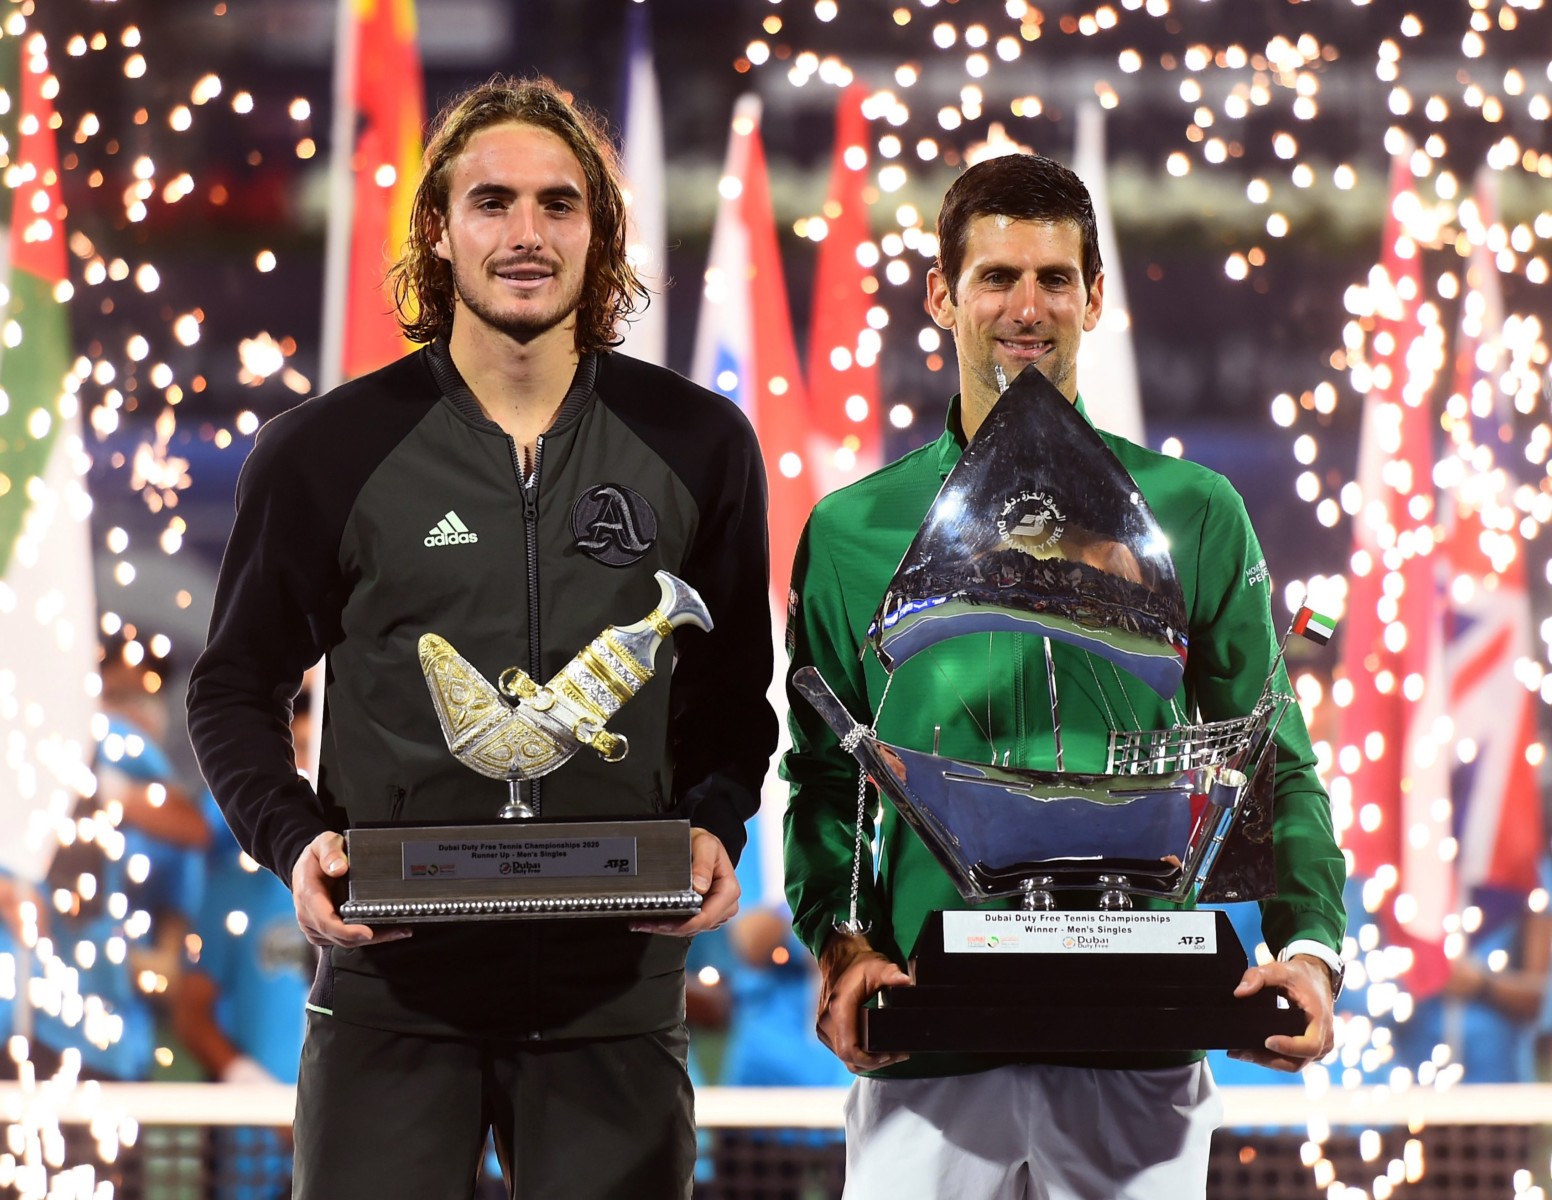 The Serbian ace lifted the Dubai title for the fifth time after beating Stefanos Tsitsipas in the final